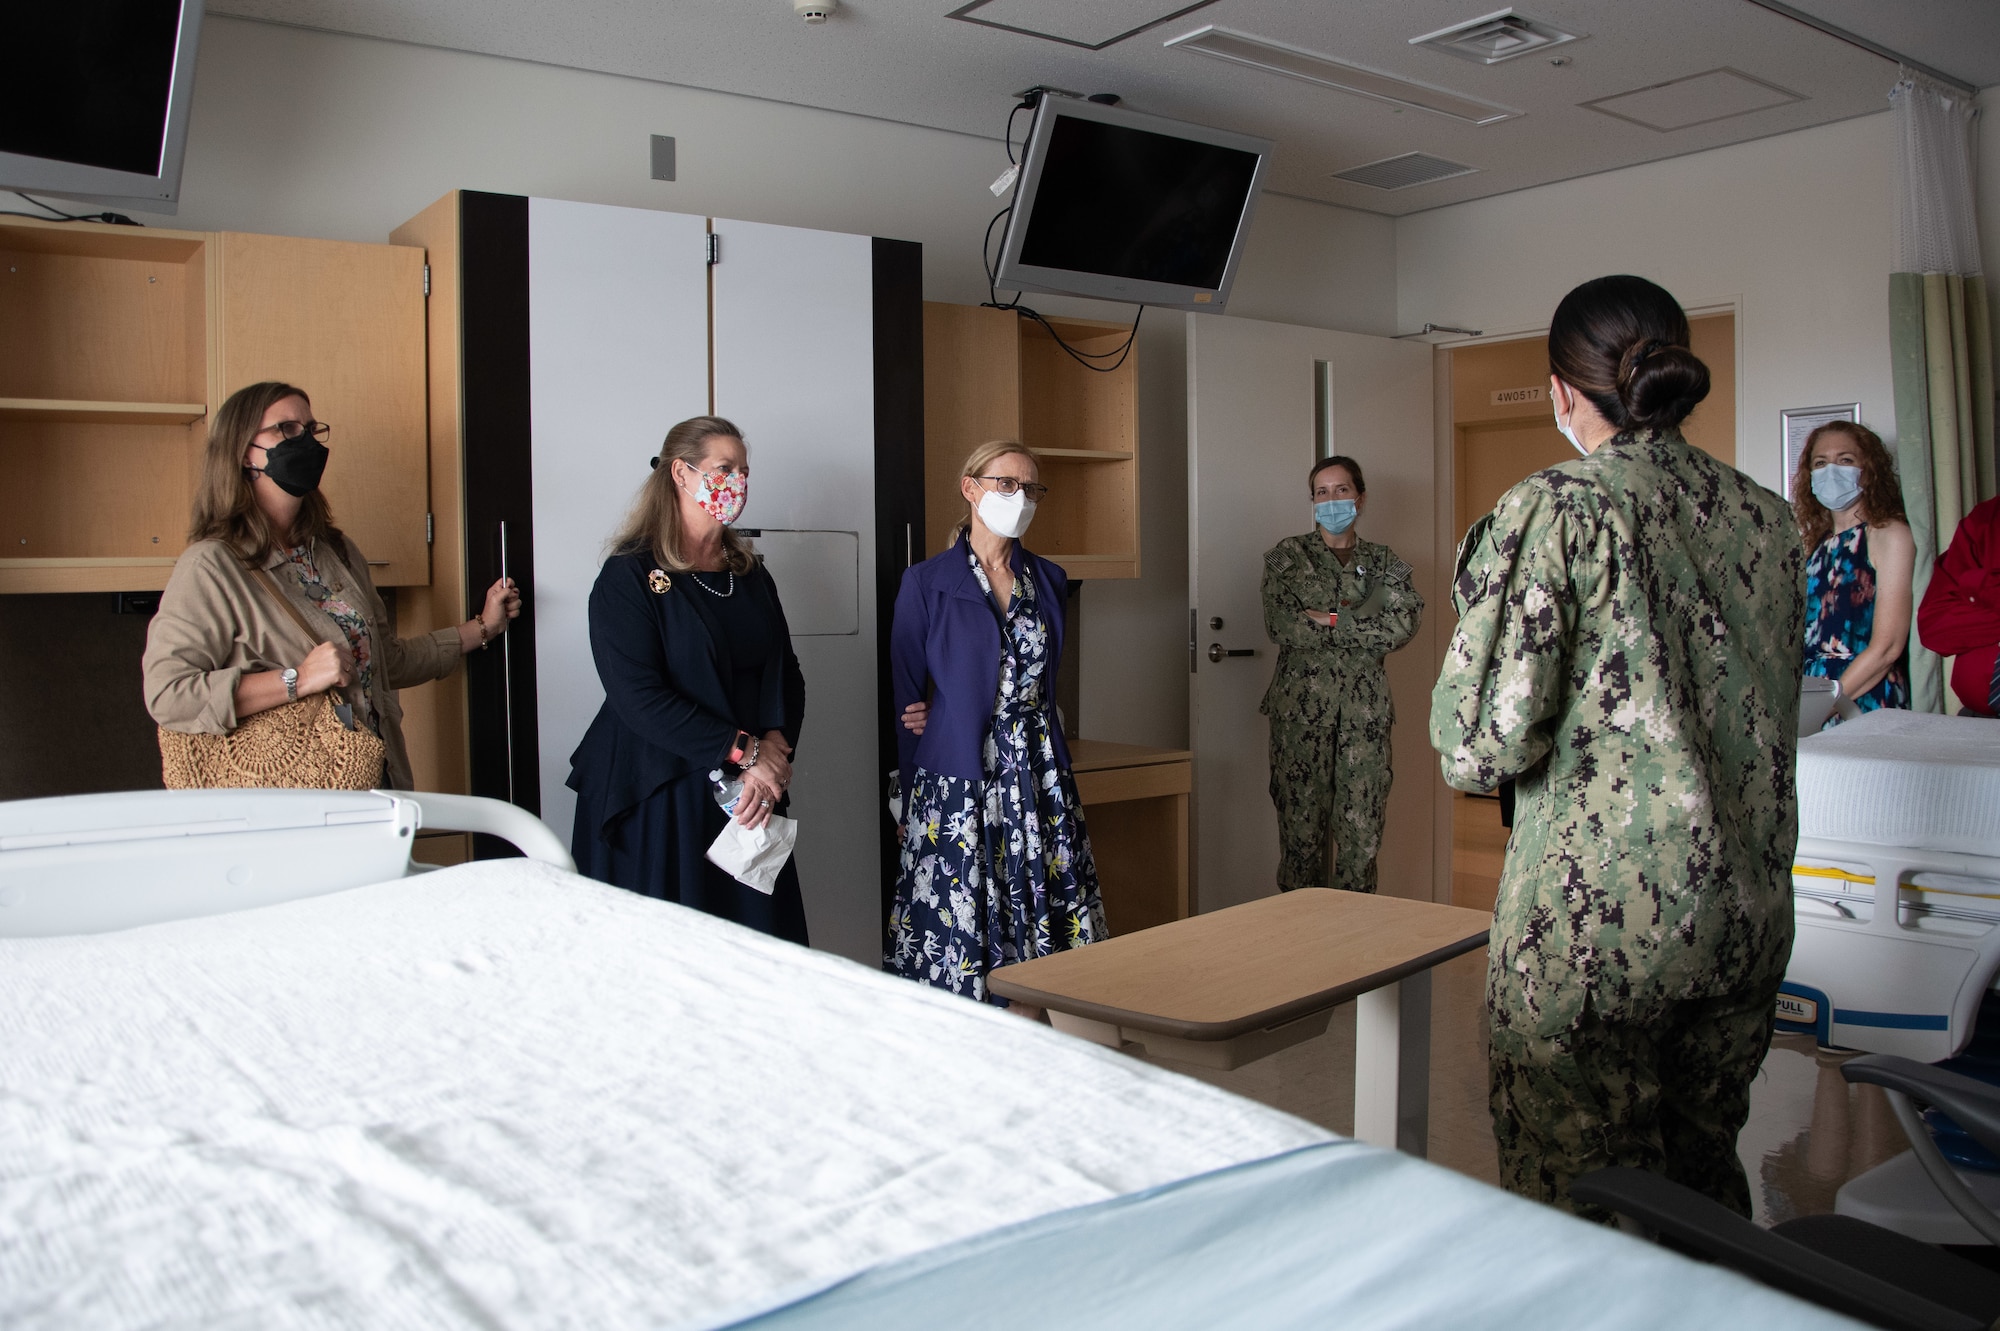 A seaman gives a tour in a hospital room